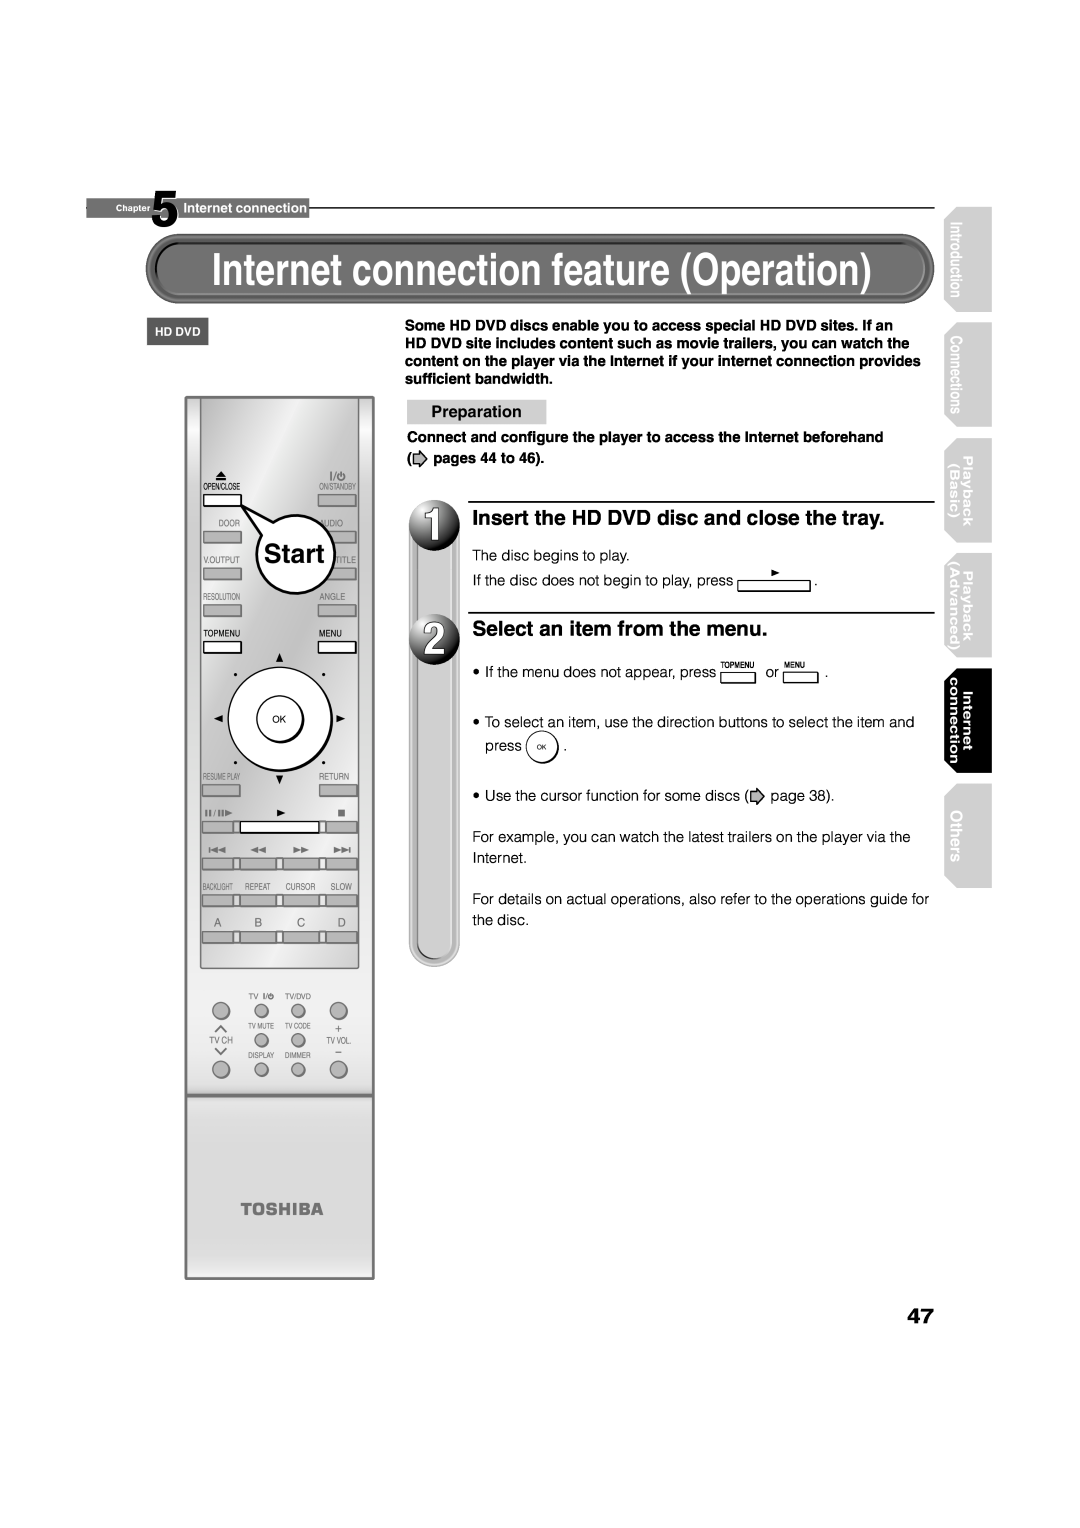 Toshiba HD-A1, HD-D1 Internet connection feature Operation, Select an item from the menu, Start, Basic, Playback, Others 